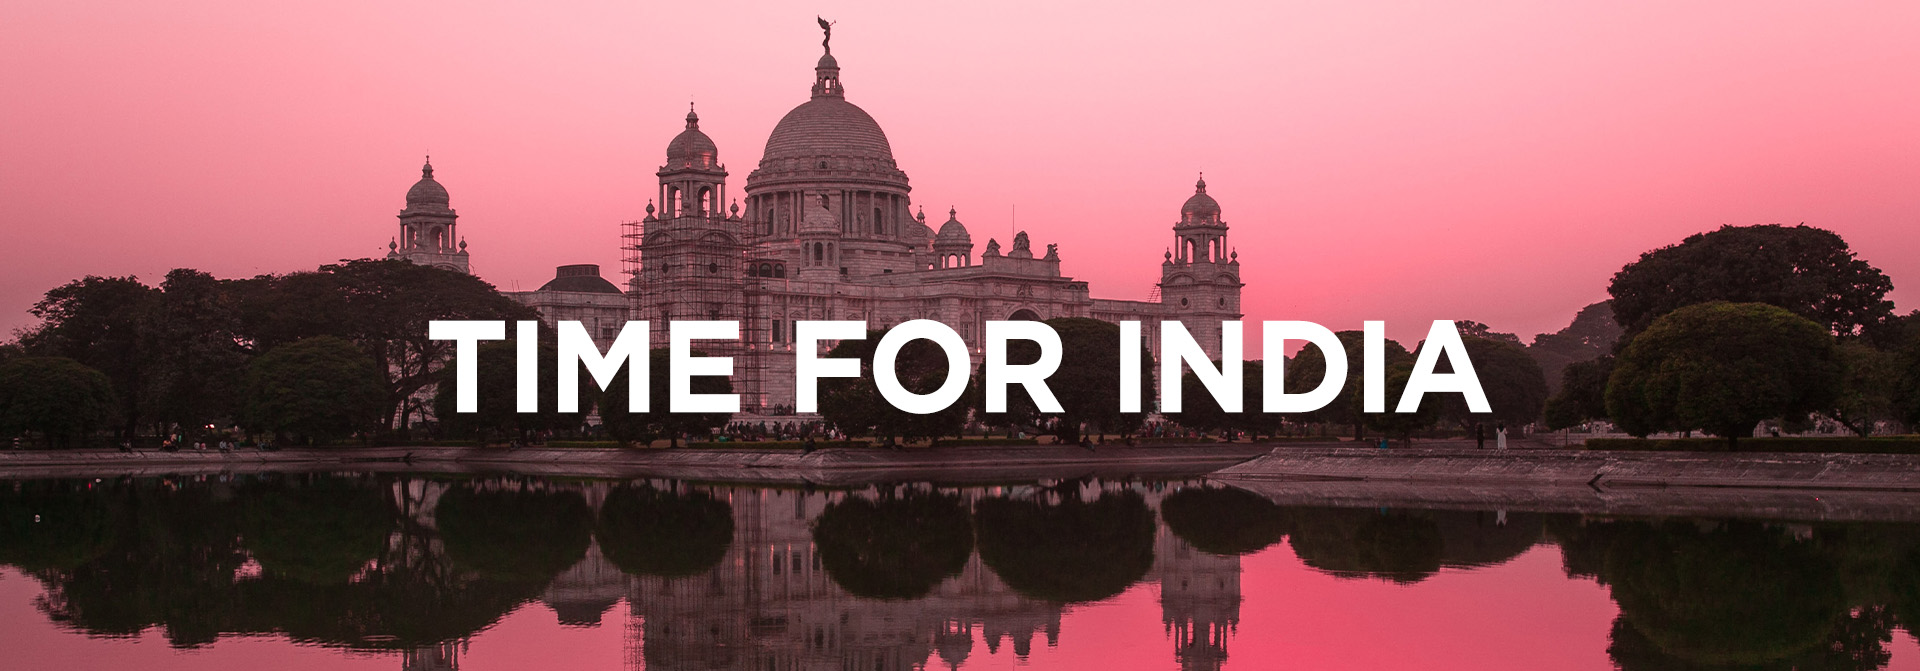 Header image for Time for India